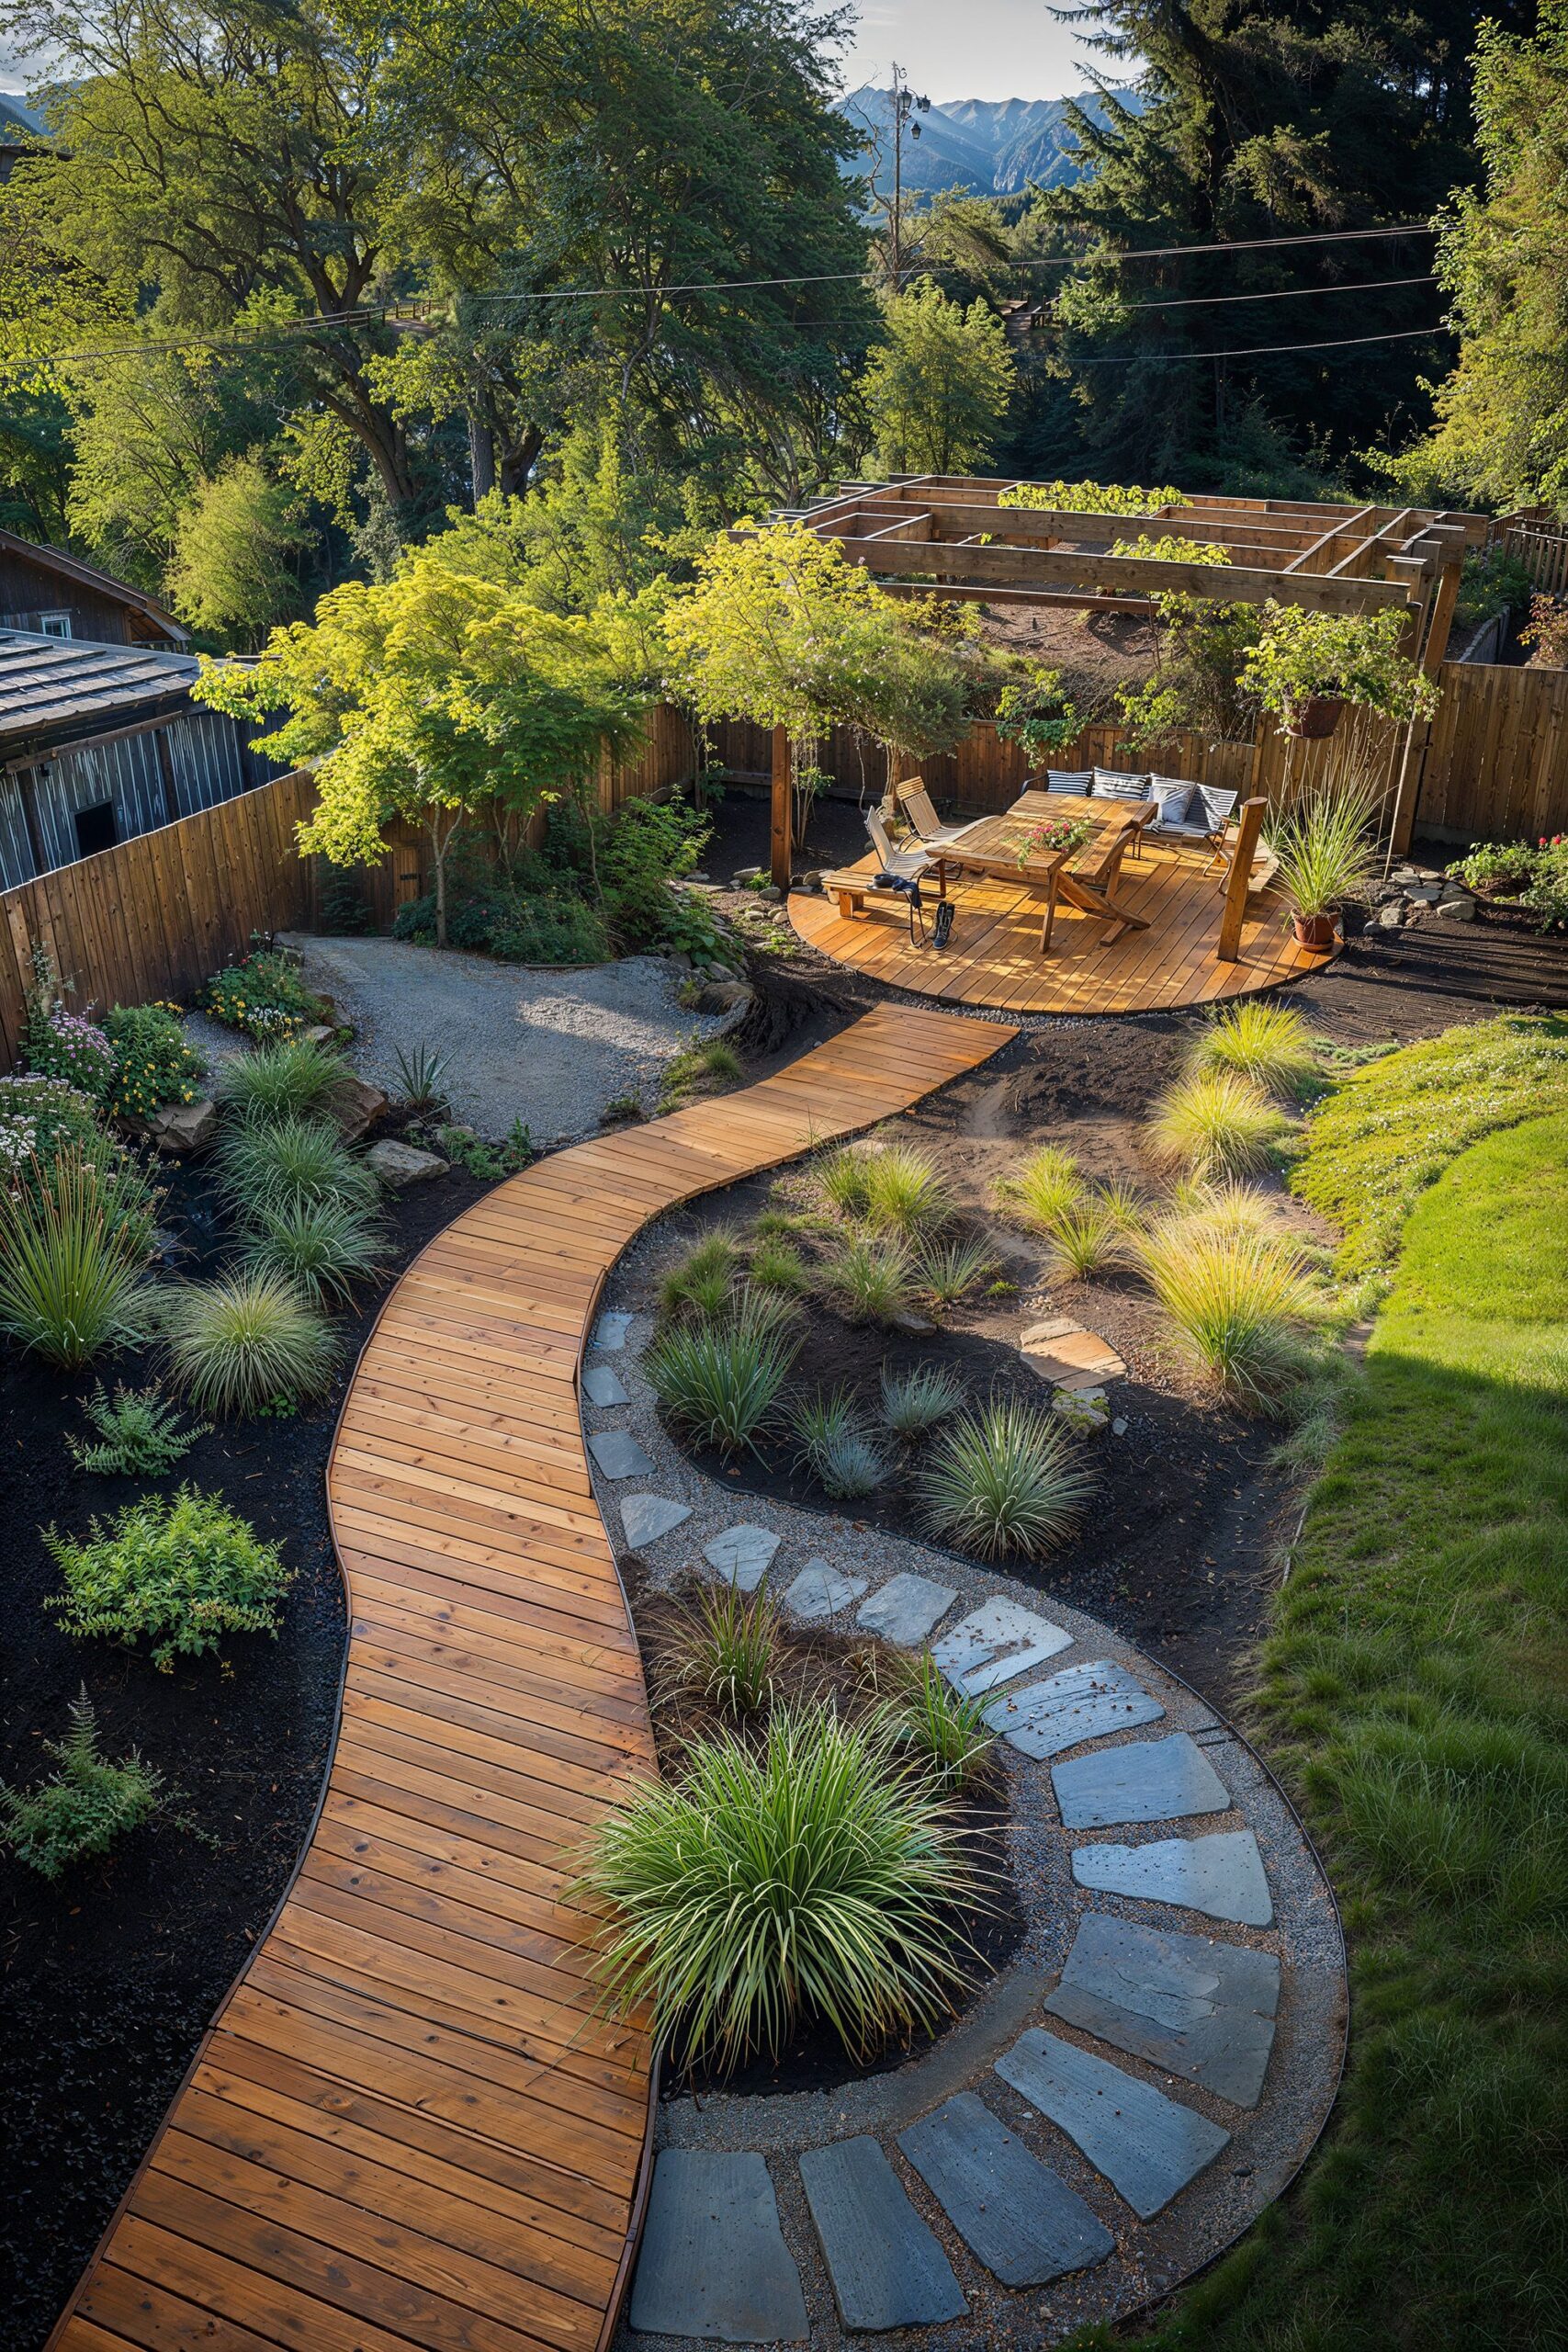 Creating a Beautiful Backyard Landscape for Your Home